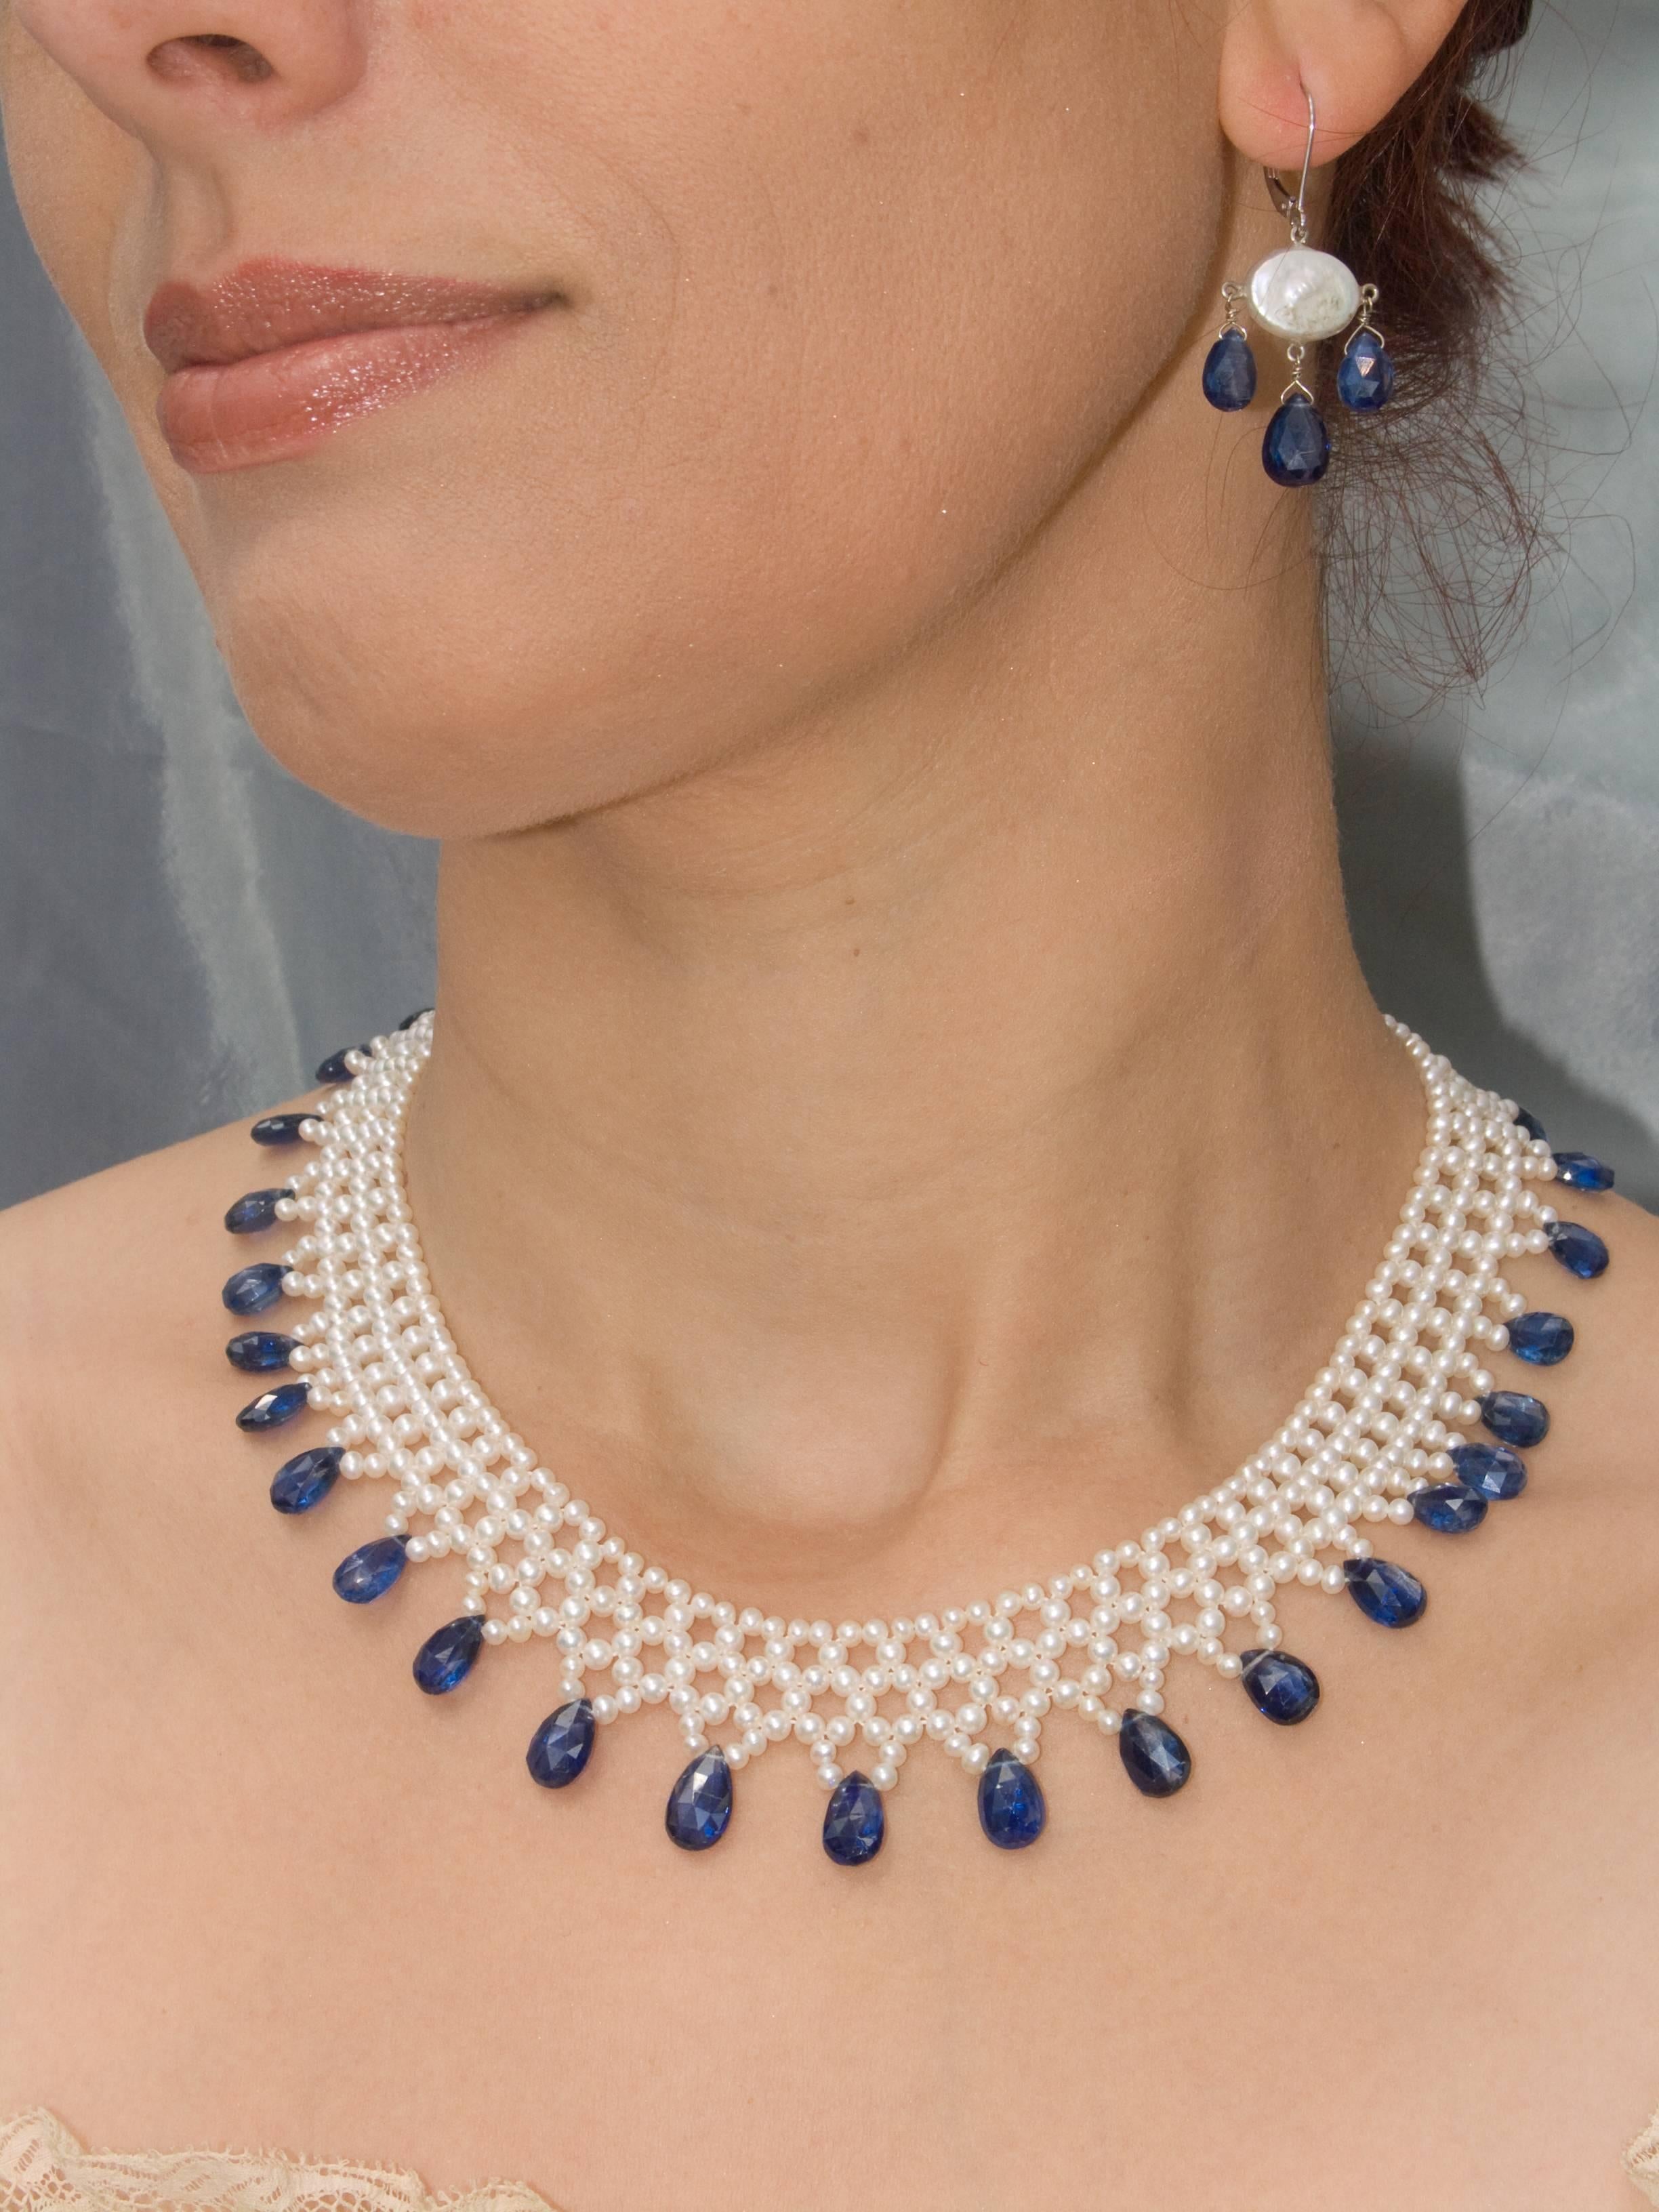 Bead Marina J. Woven Pearl Necklace with Kyanite Briolets and 14 Karat Gold Clasp For Sale